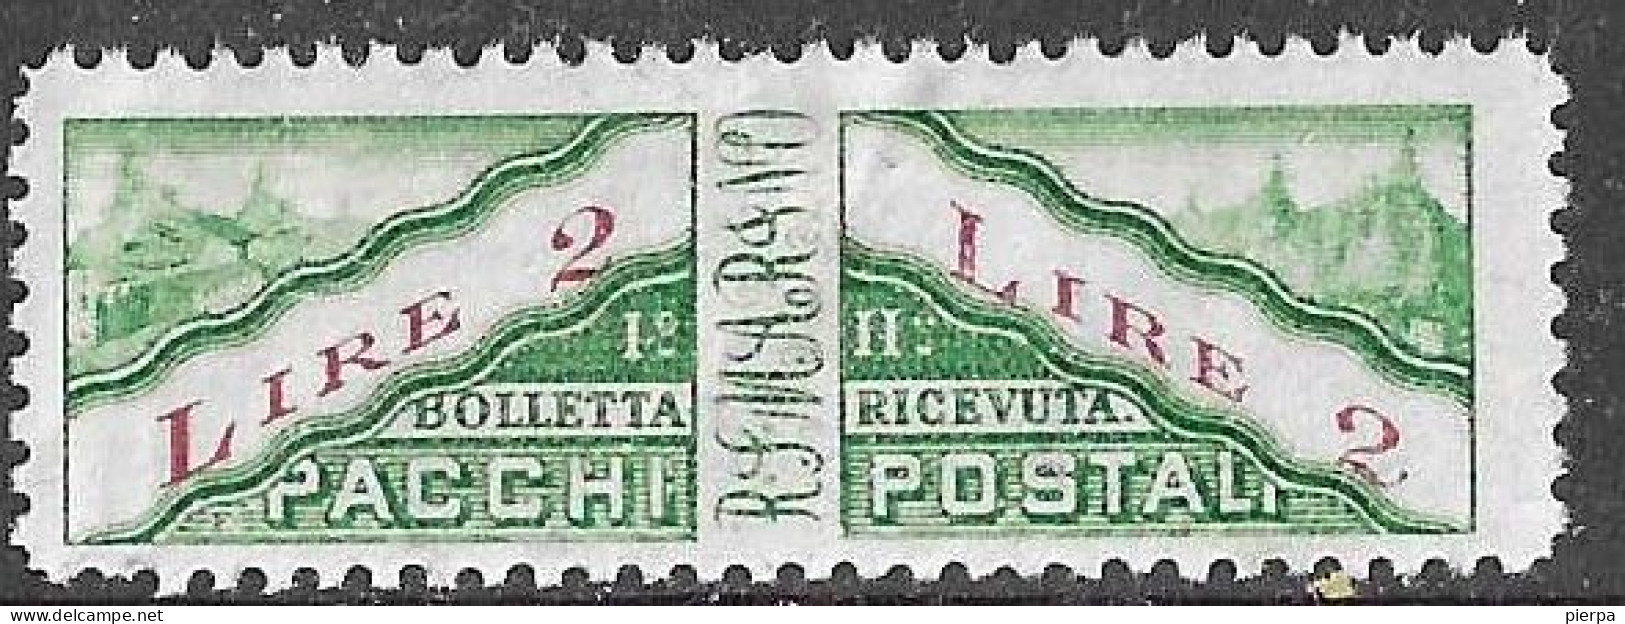 SAN MARINO - 1928 - PACCHI POSTALI - LIRE 2 - NUOVO MNH** (YVERT CP 9 - MICHEL PS  9 - SS PP9) - Parcel Post Stamps